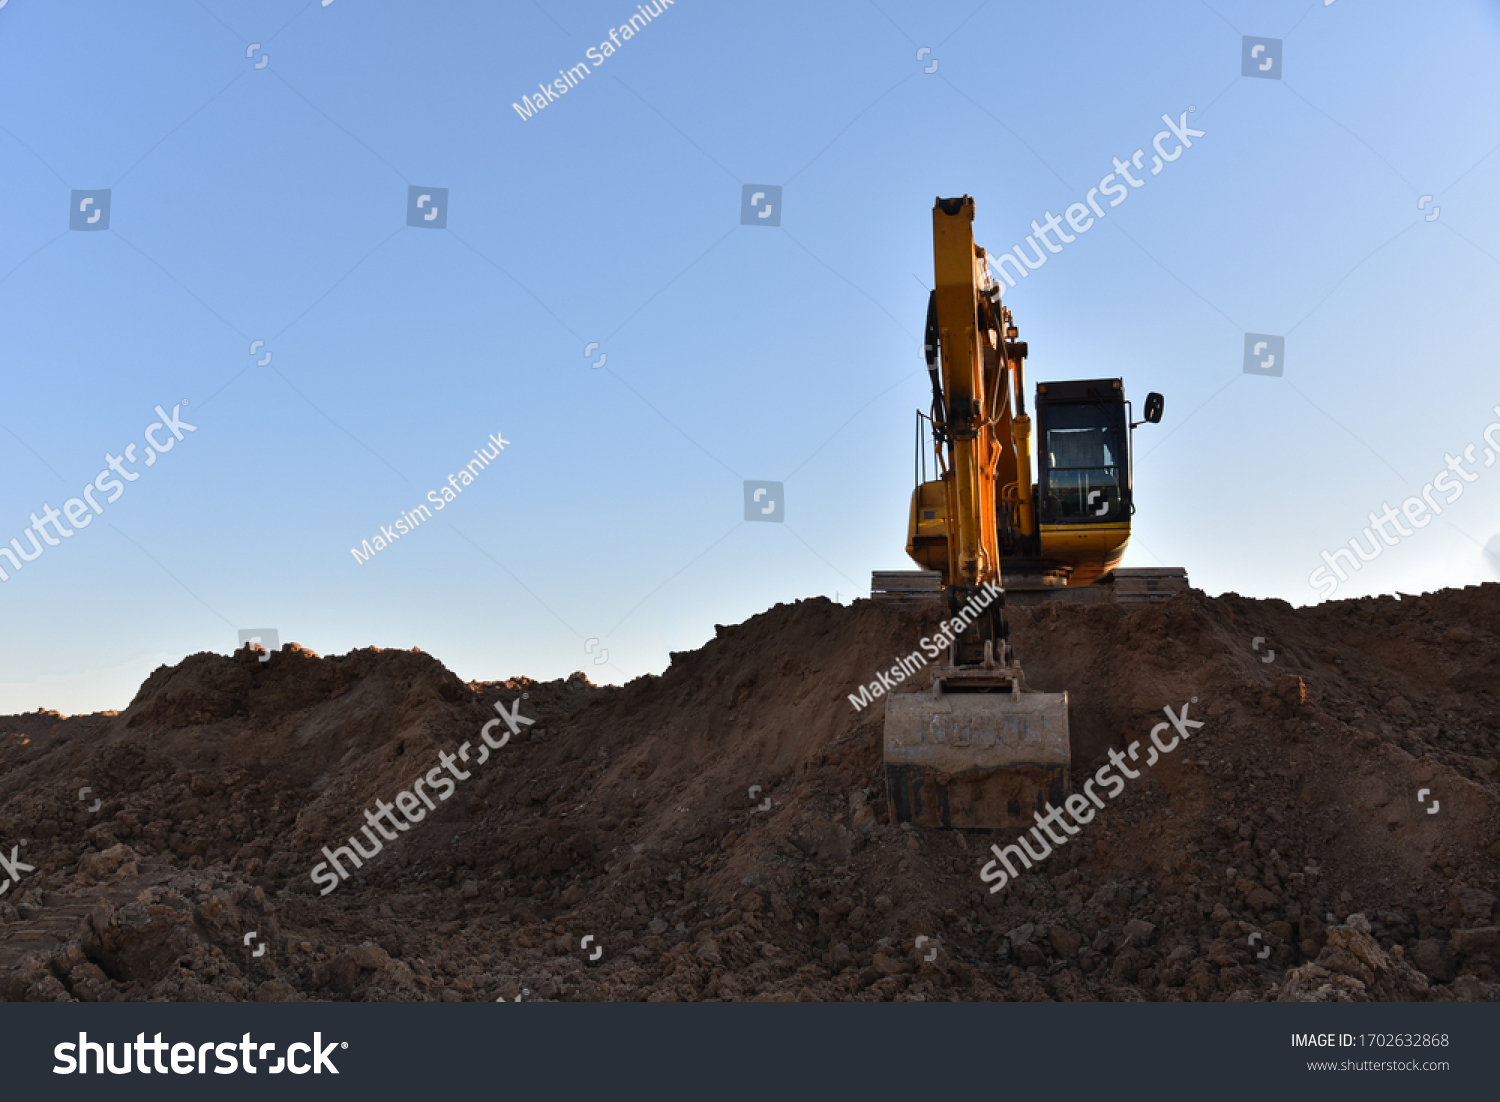 Yellow excavator during earthmoving at open pit on blue sky background. Construction machinery and earth-moving heavy equipment for excavation, loading, lifting and hauling of cargo on job sites #1702632868